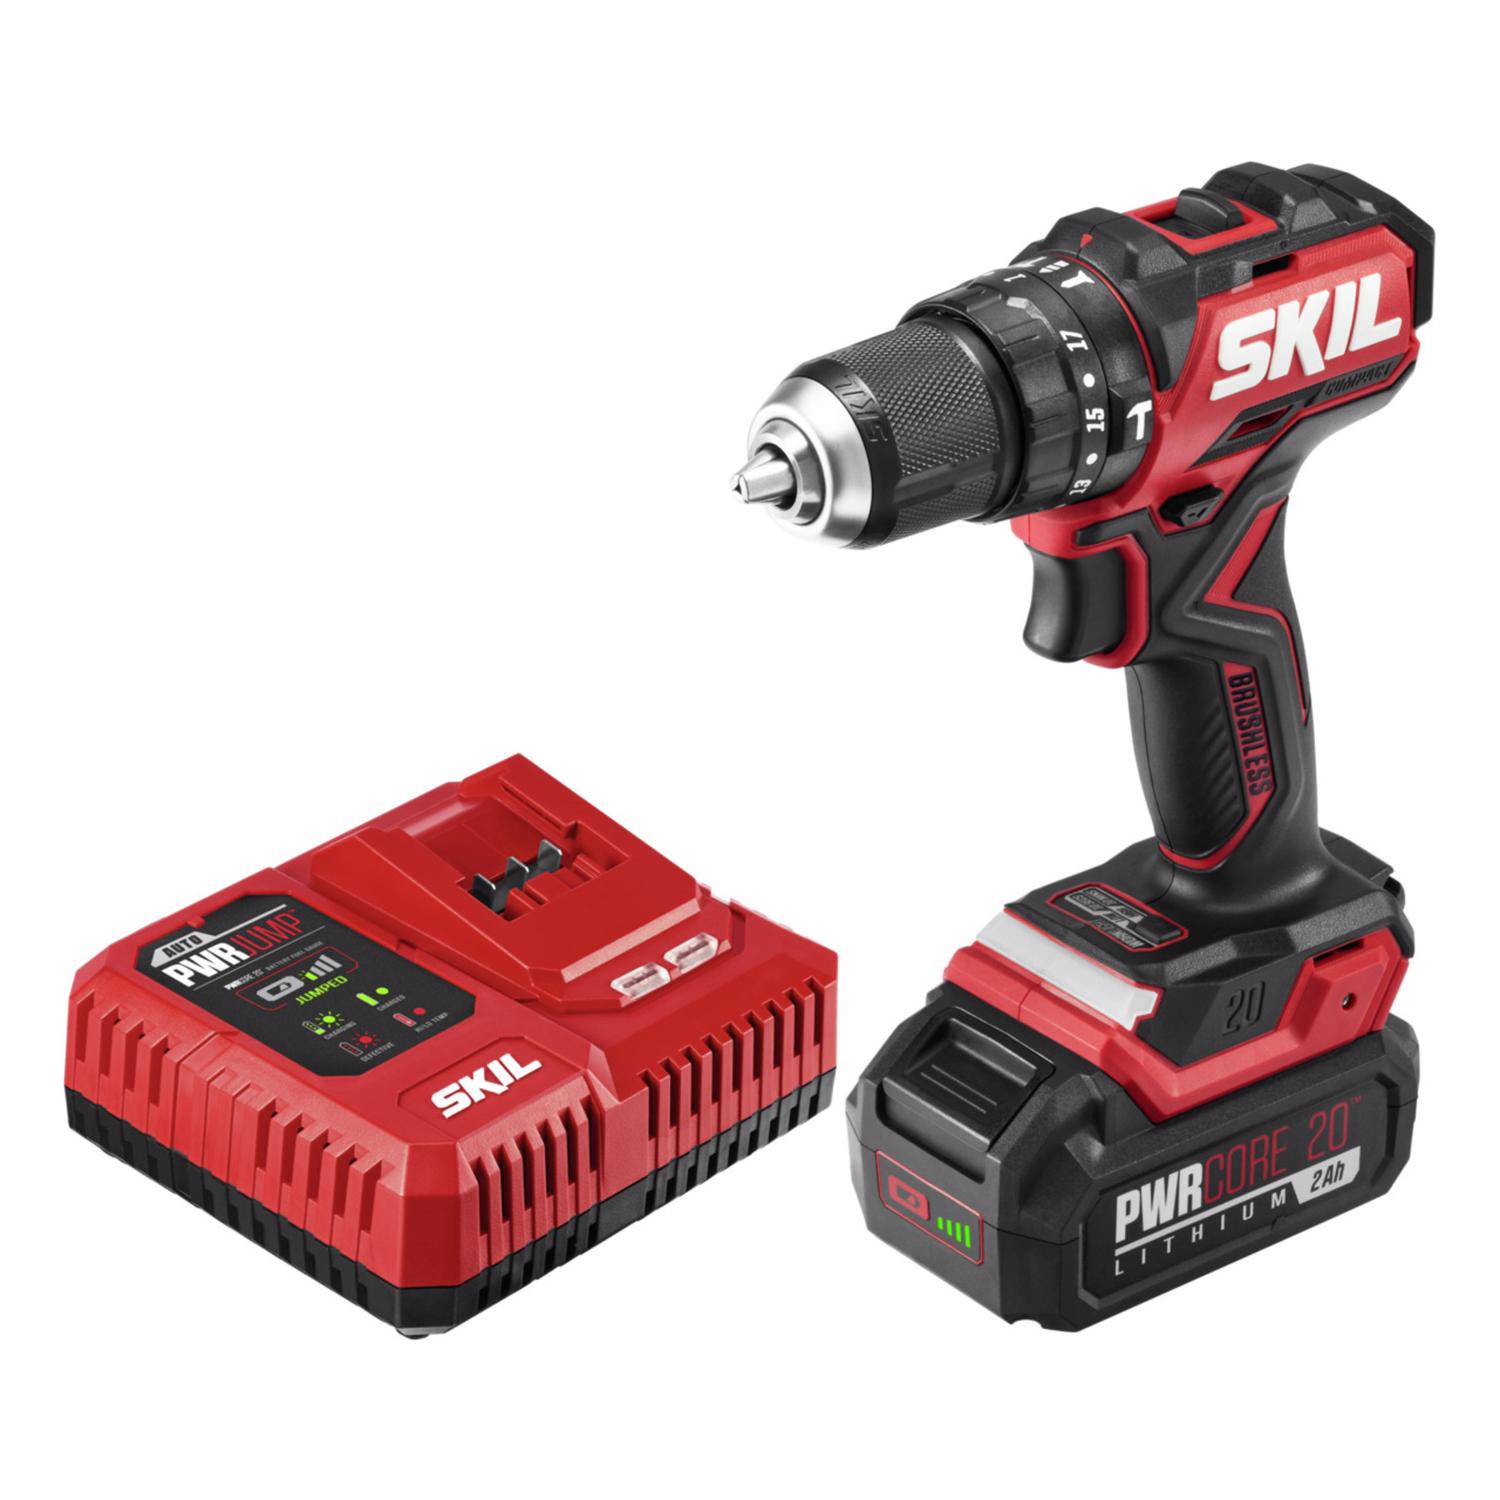 Photos - Drill / Screwdriver Skil 20V PWR CORE 20 1/2 in. Brushless Cordless Compact Hammer Drill Kit ( 